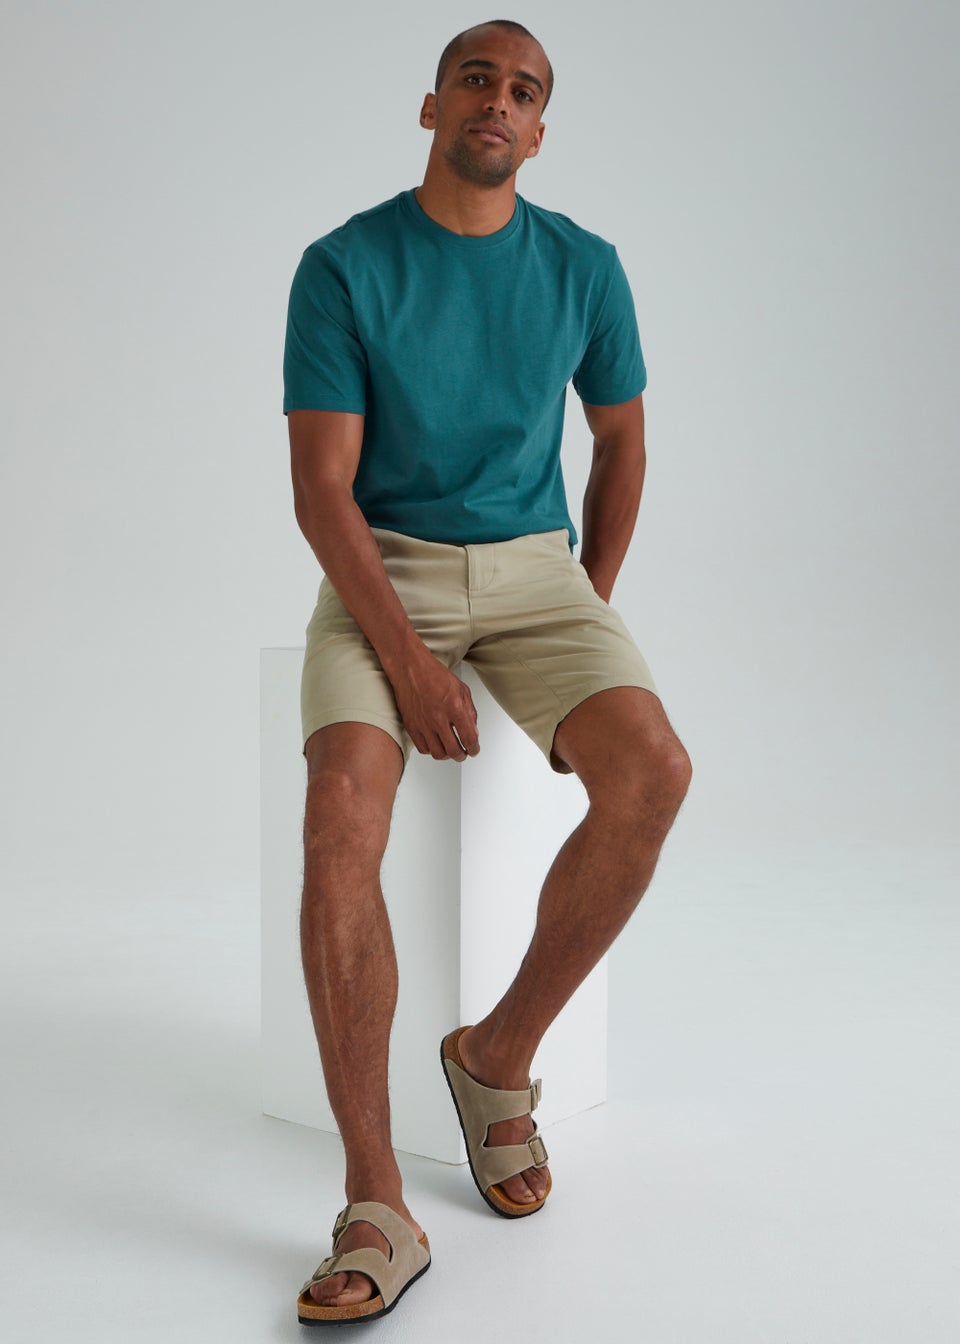 Teal Essential Crew Neck T-Shirt